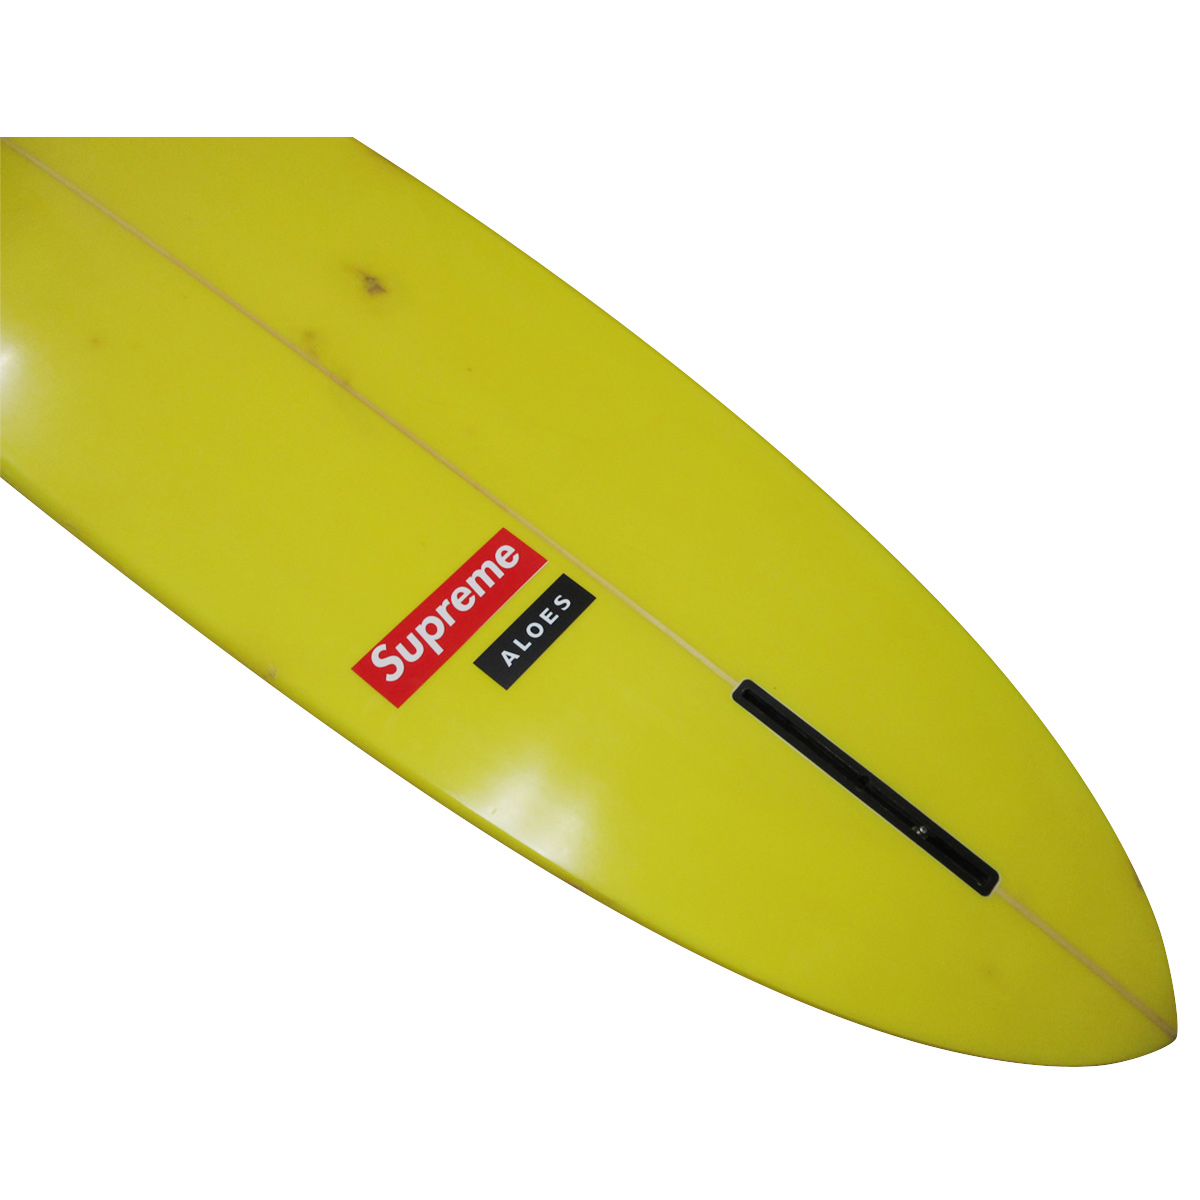 YU SURF CLASSIC / MAGIC CARPET 7`10 Shaped by KEVIN CONNELLY